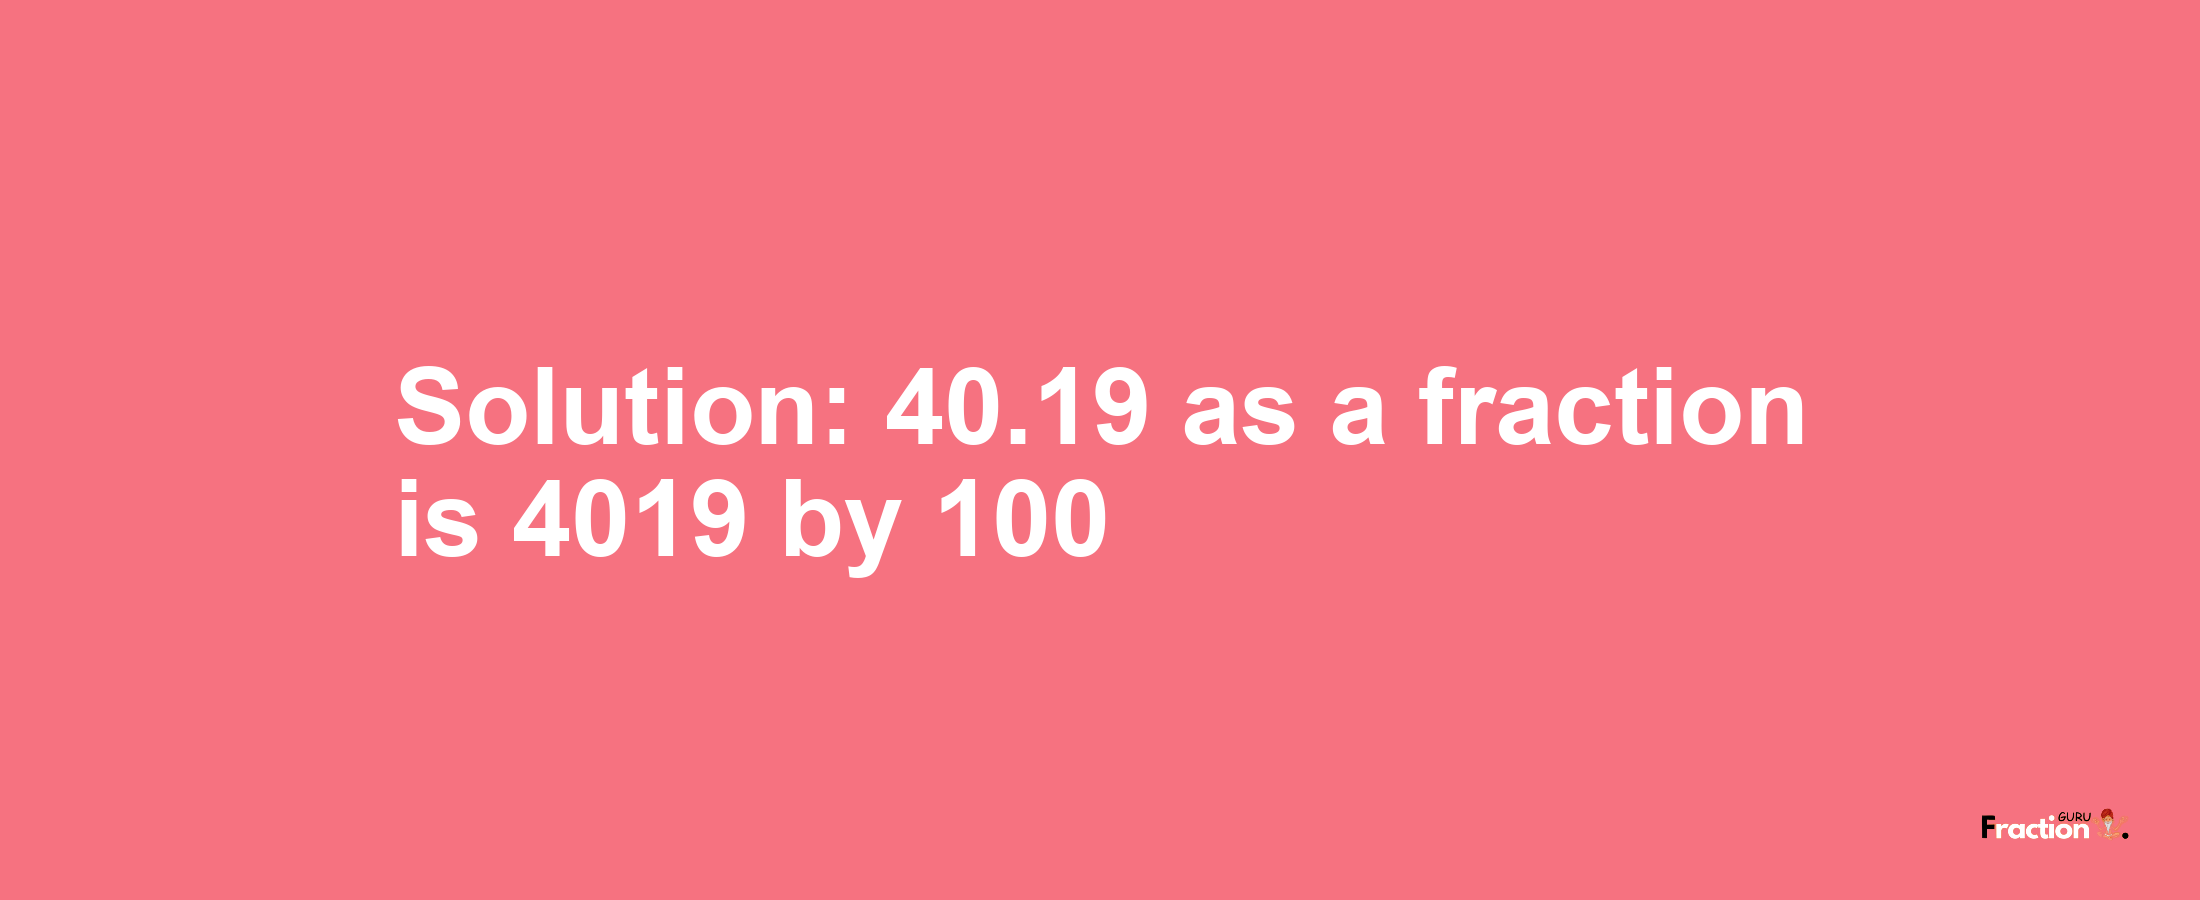 Solution:40.19 as a fraction is 4019/100